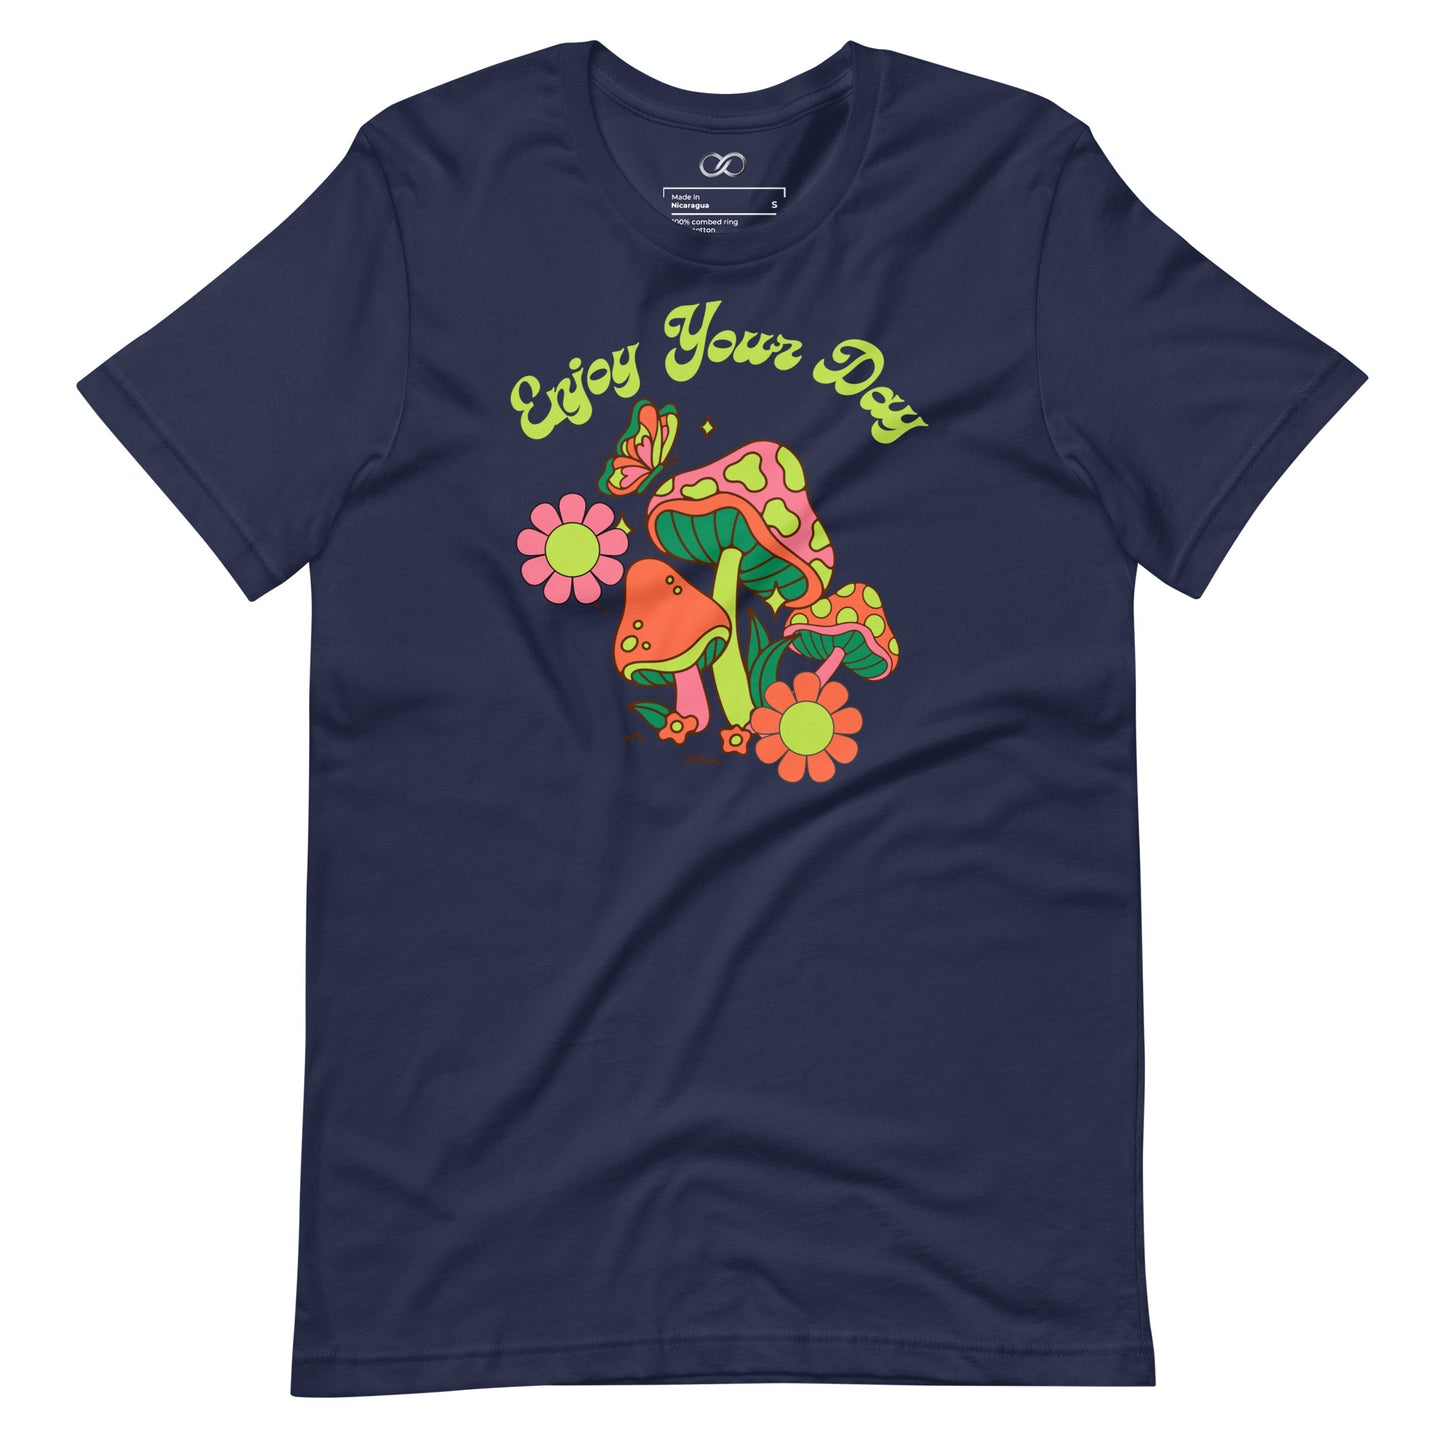 A navy short sleeve shirt featuring a colorful 'Enjoy Your Day' mushroom design, combining comfort with a cheerful saying.